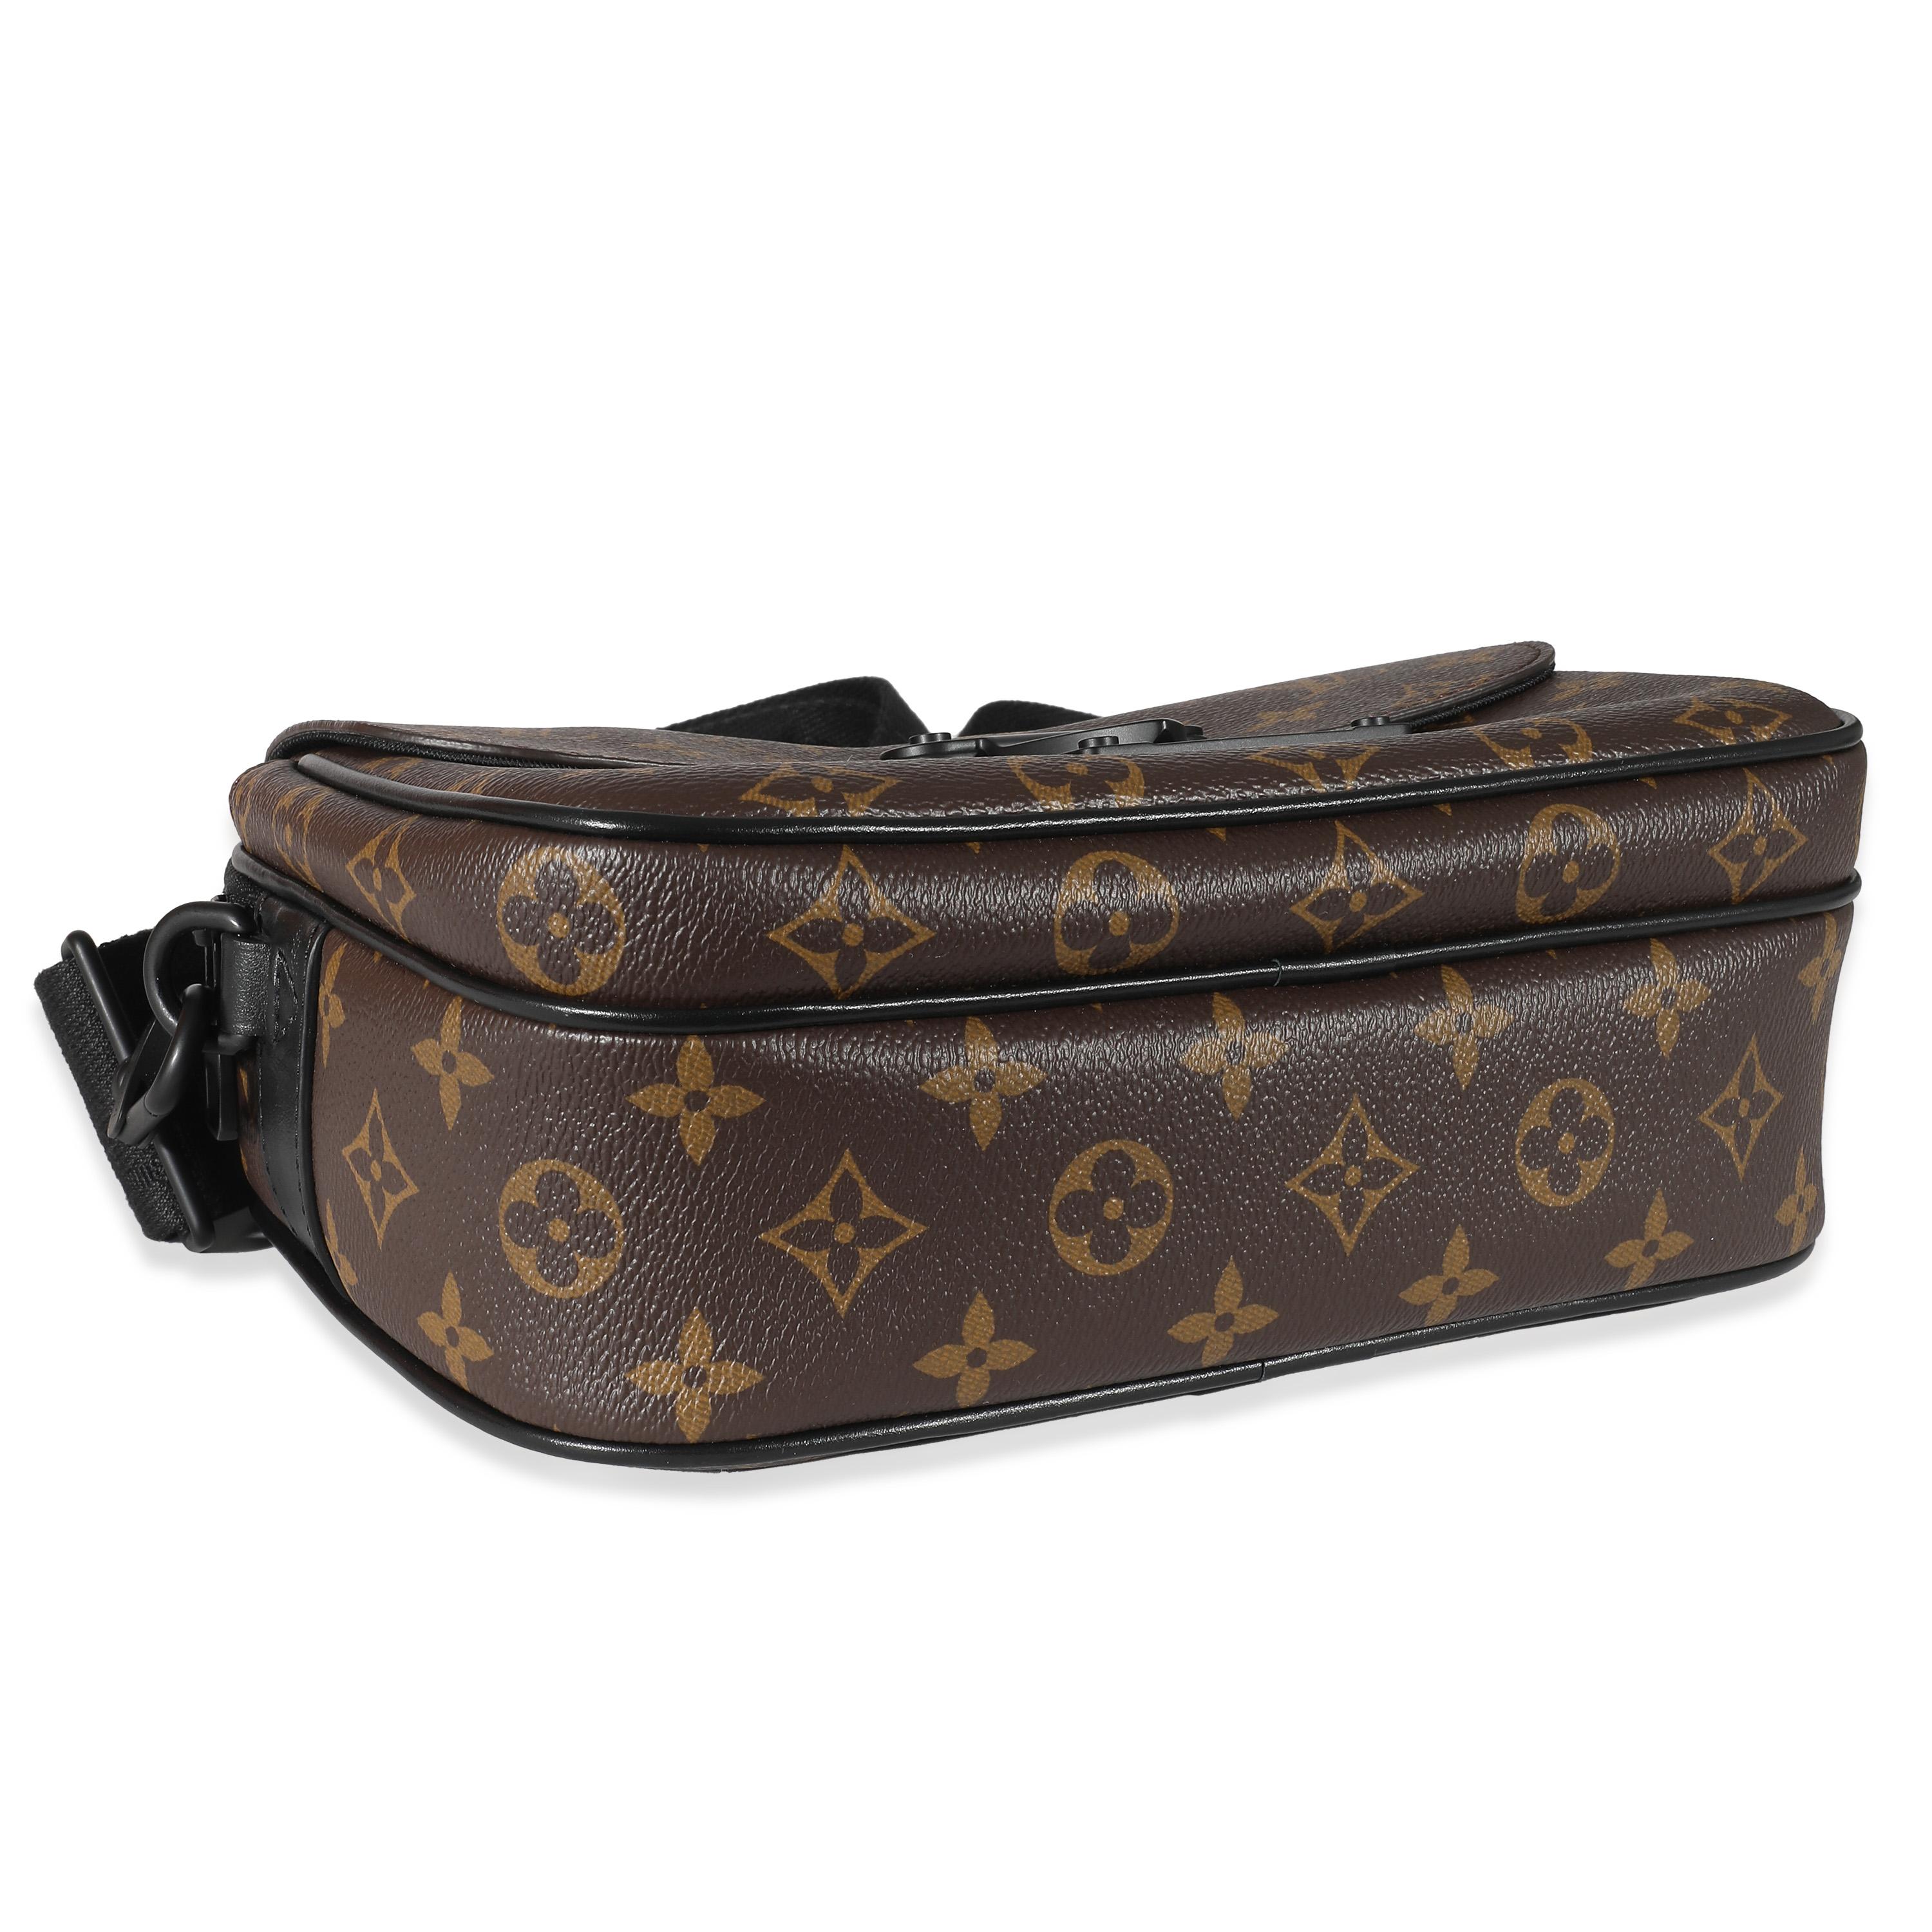 Listing Title: Louis Vuitton Monogram Macassar S Lock Messenger
SKU: 135556
MSRP: 2910.00 USD
Condition: Pre-owned 
Handbag Condition: Excellent
Condition Comments: Item is in excellent condition and displays light signs of wear. Light fraying along